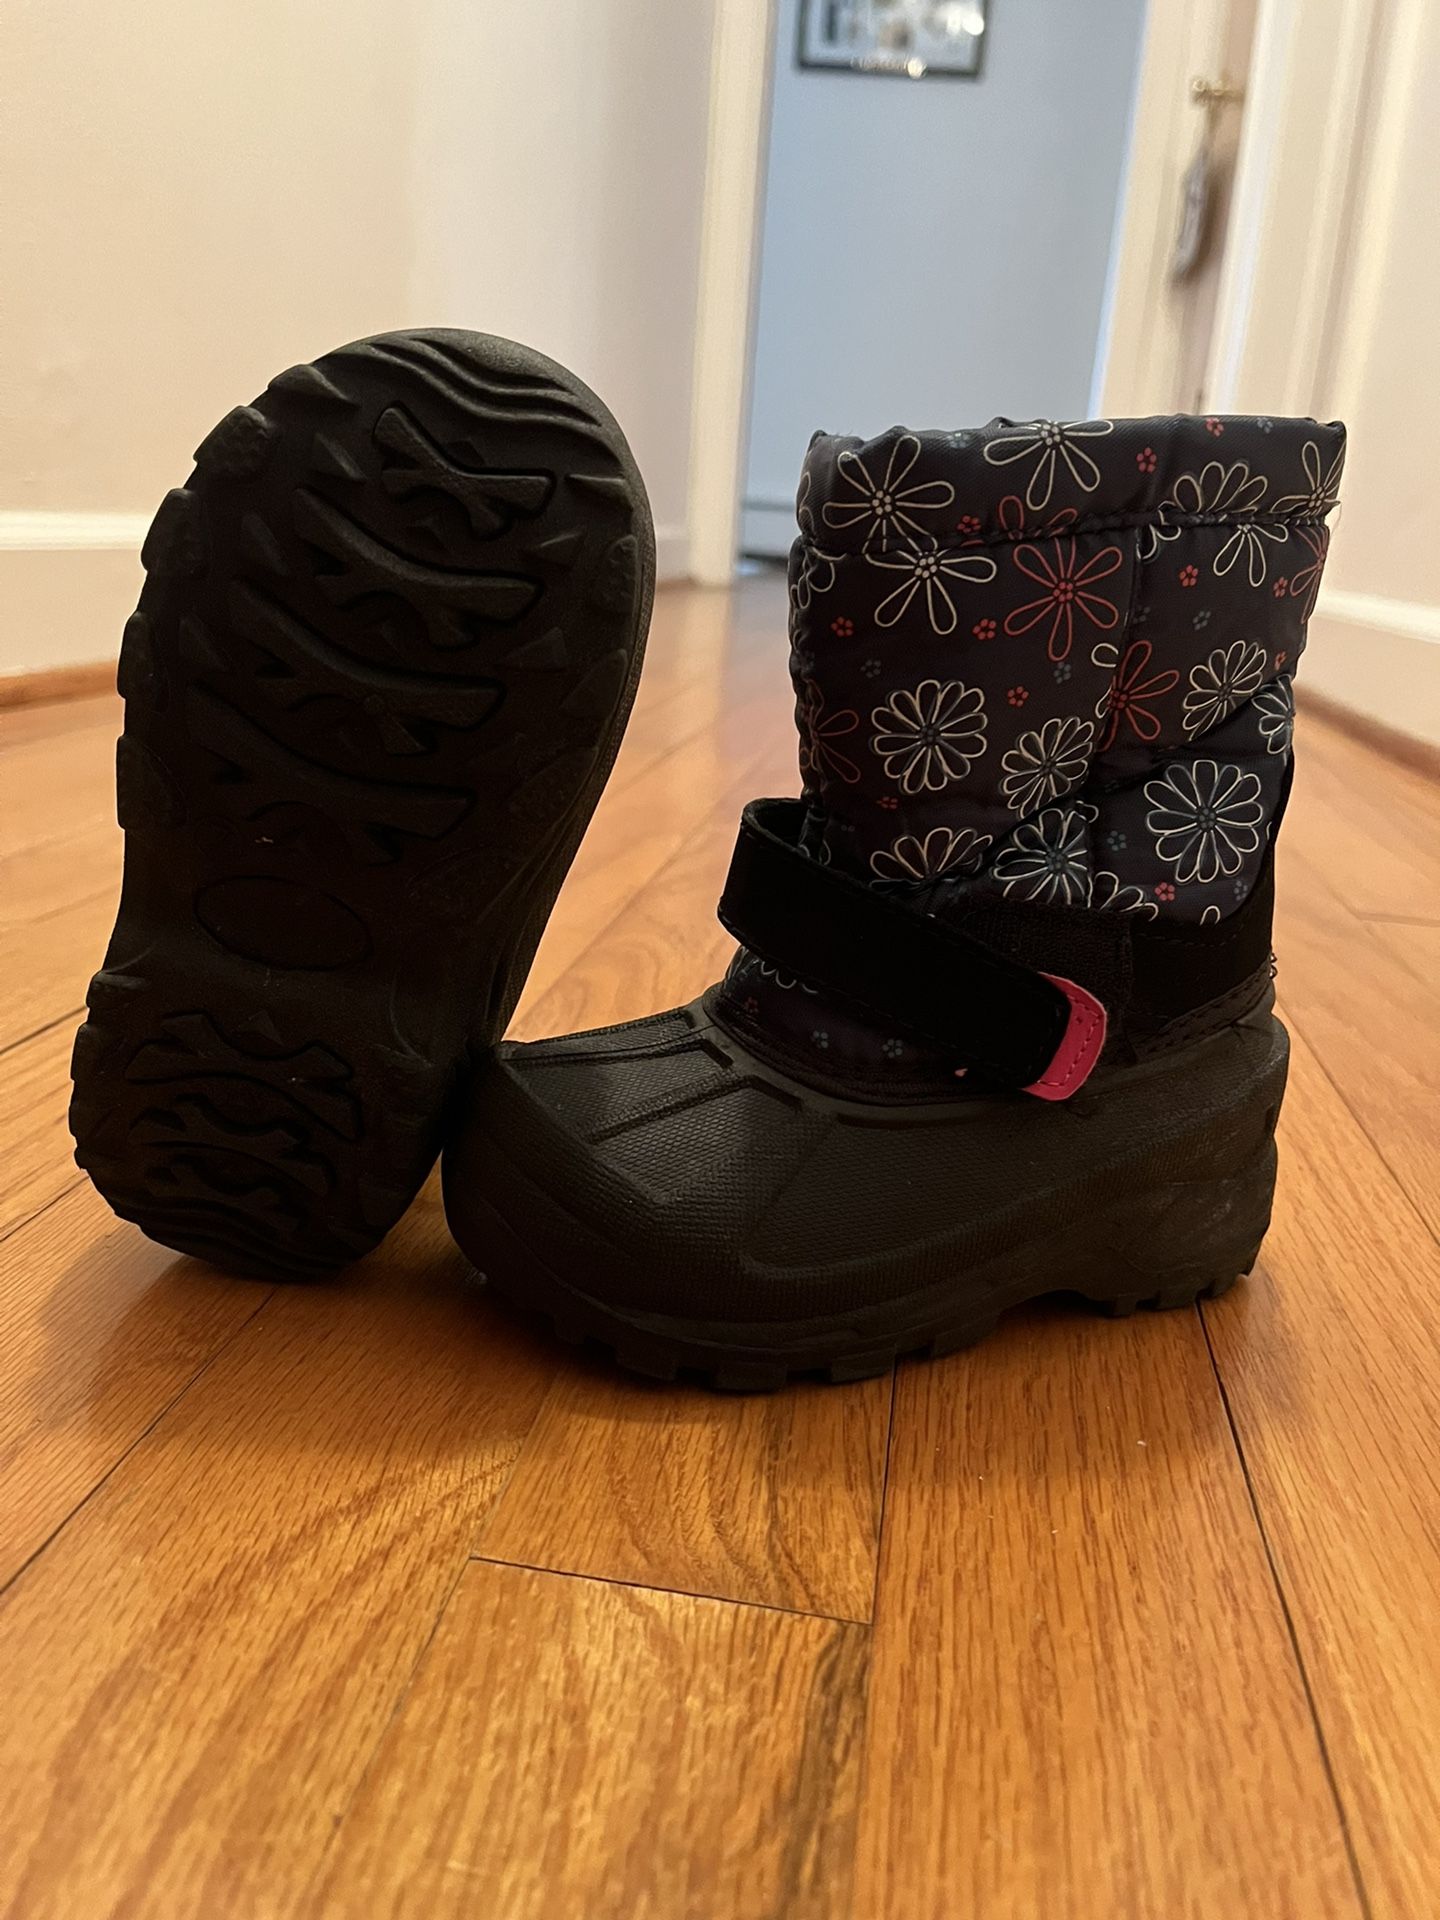 Toddler Snow boots Size 7